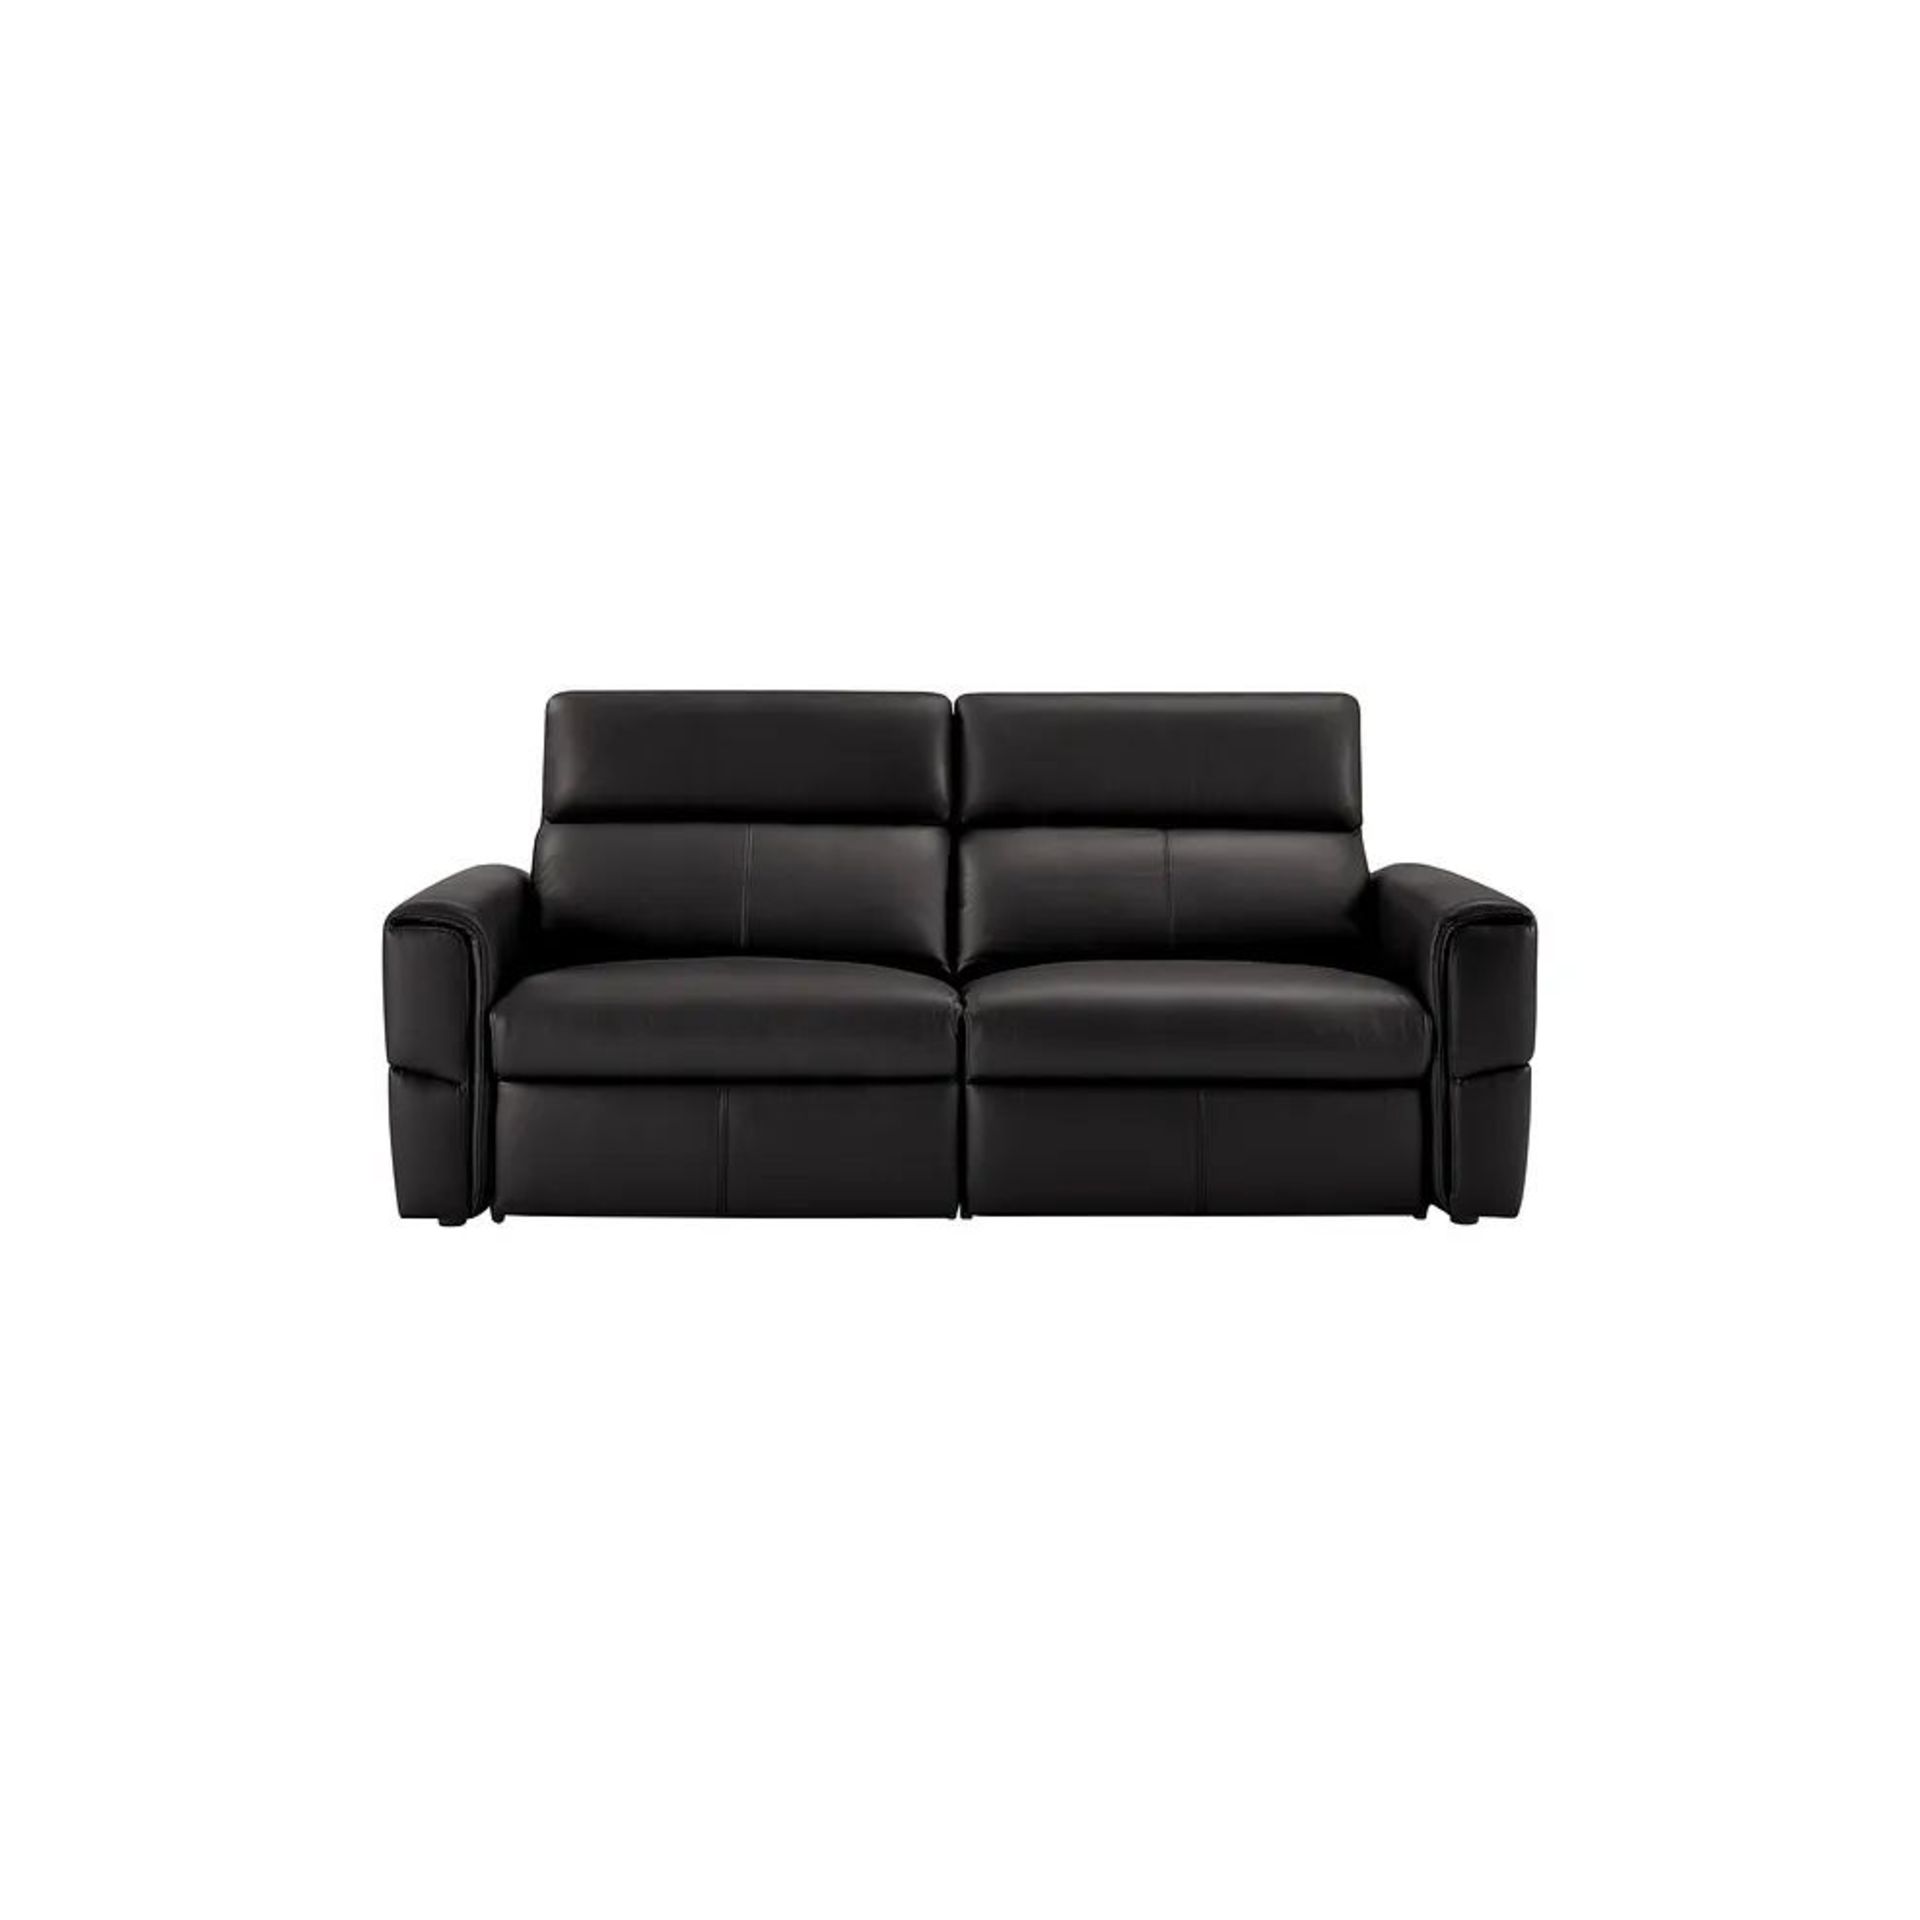 BRAND NEW SAMSON 3 Seater Electric Recliner Sofa - BLACK LEATHER. RRP £1779. Showcasing neat, modern - Image 2 of 8